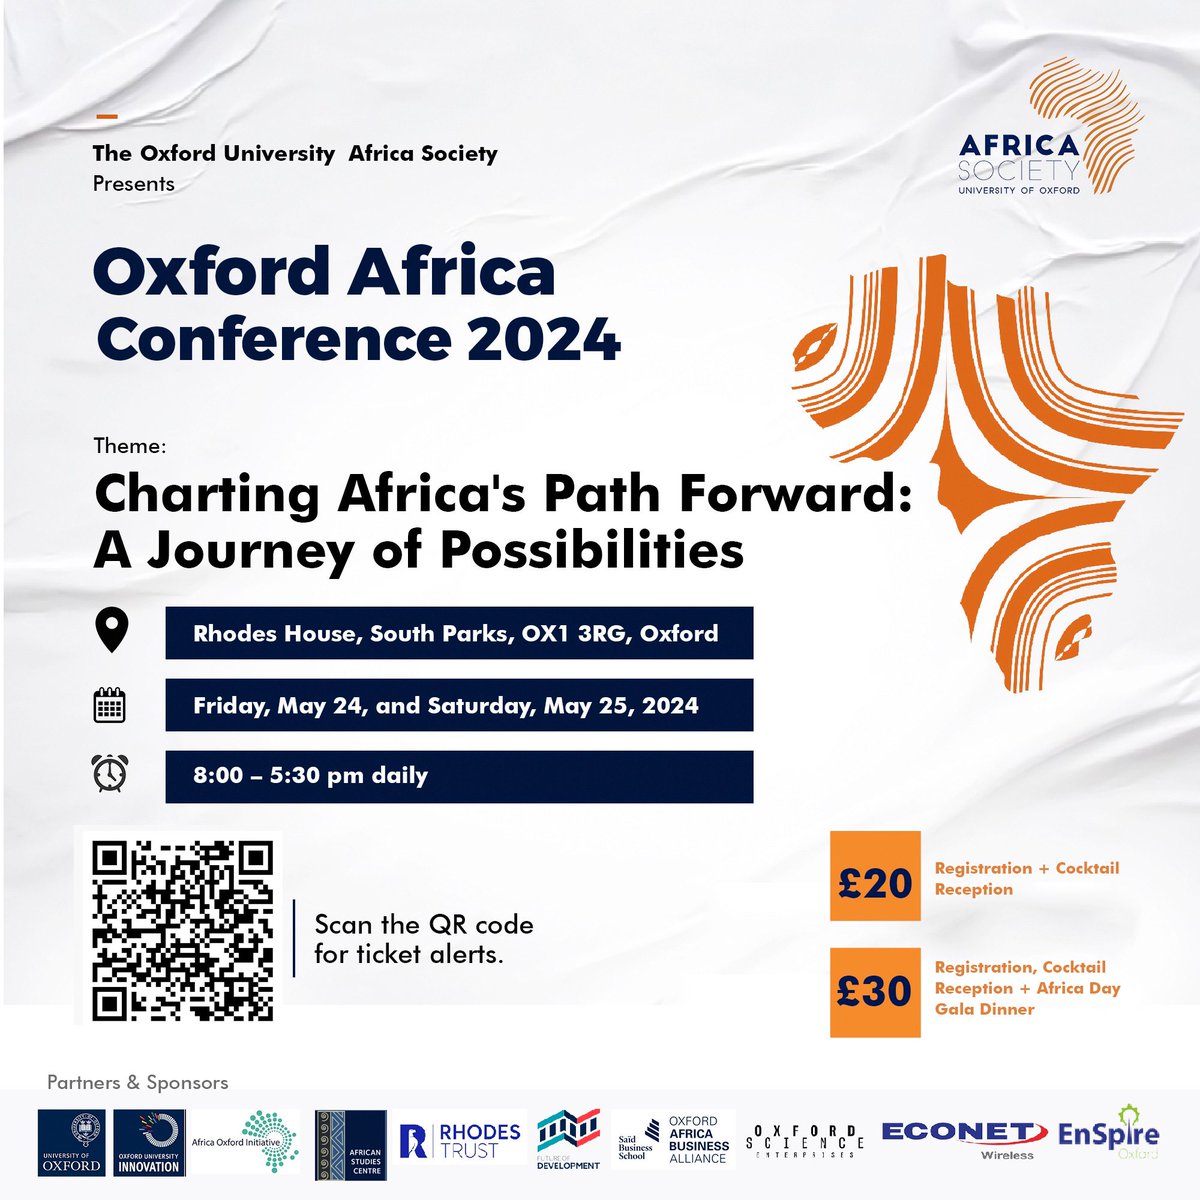 🌍 Exciting news! @oxfordafrica is delighted to announce the 2024 Oxford Africa Conference.

This years theme is: ‘Charting Africa’s Path Forward: A Journey of Possibilities’

#OxfordAfricaConference2024 #OAC2024 #ISF2024 #ChartingAfricasPathForward #JourneyOfPossibilities